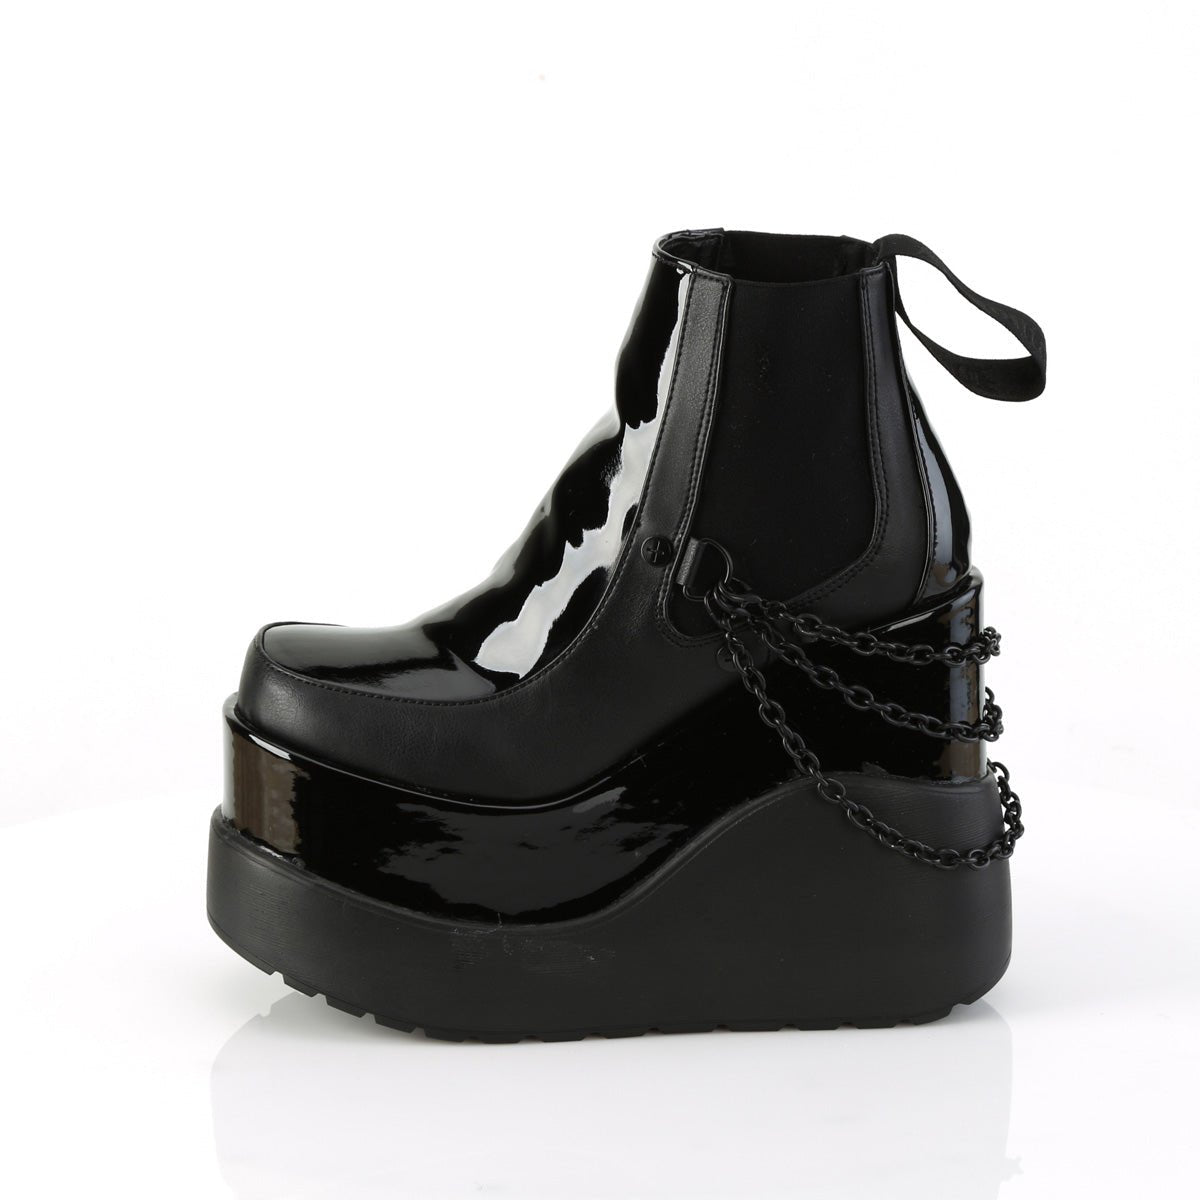 Too Fast | Demonia Void 50 | Black Patent Leather Women's Ankle Boots